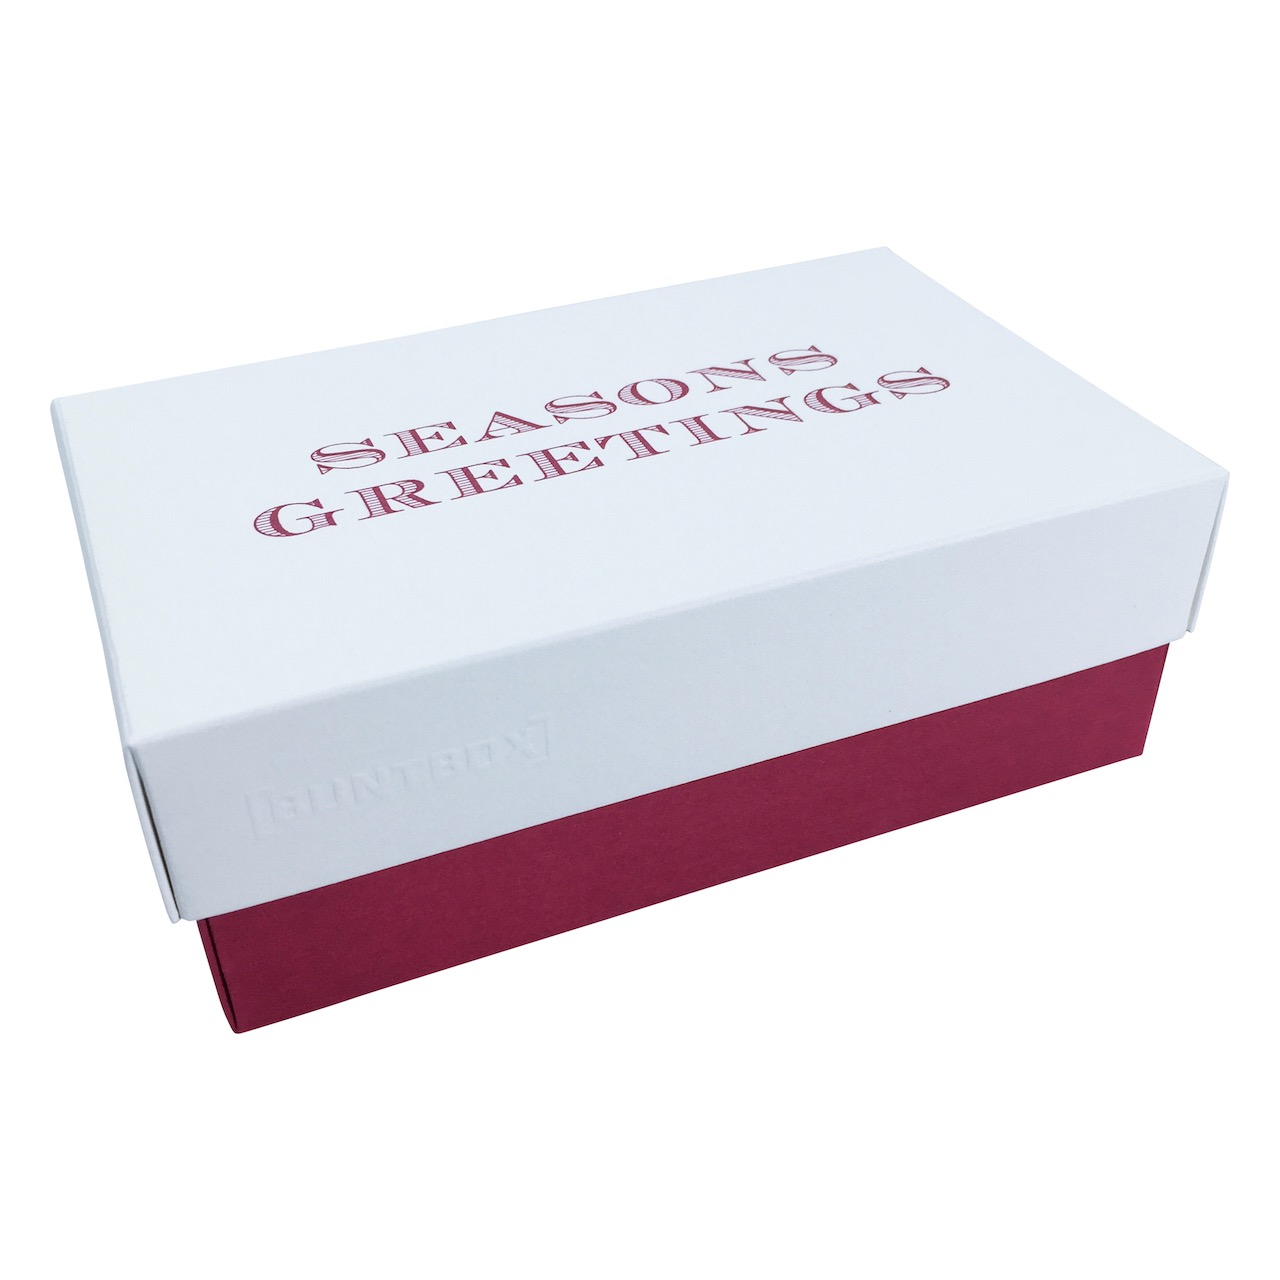 Buntbox XL Fine Paper Seasons Greetings in Champagner-Bordeaux